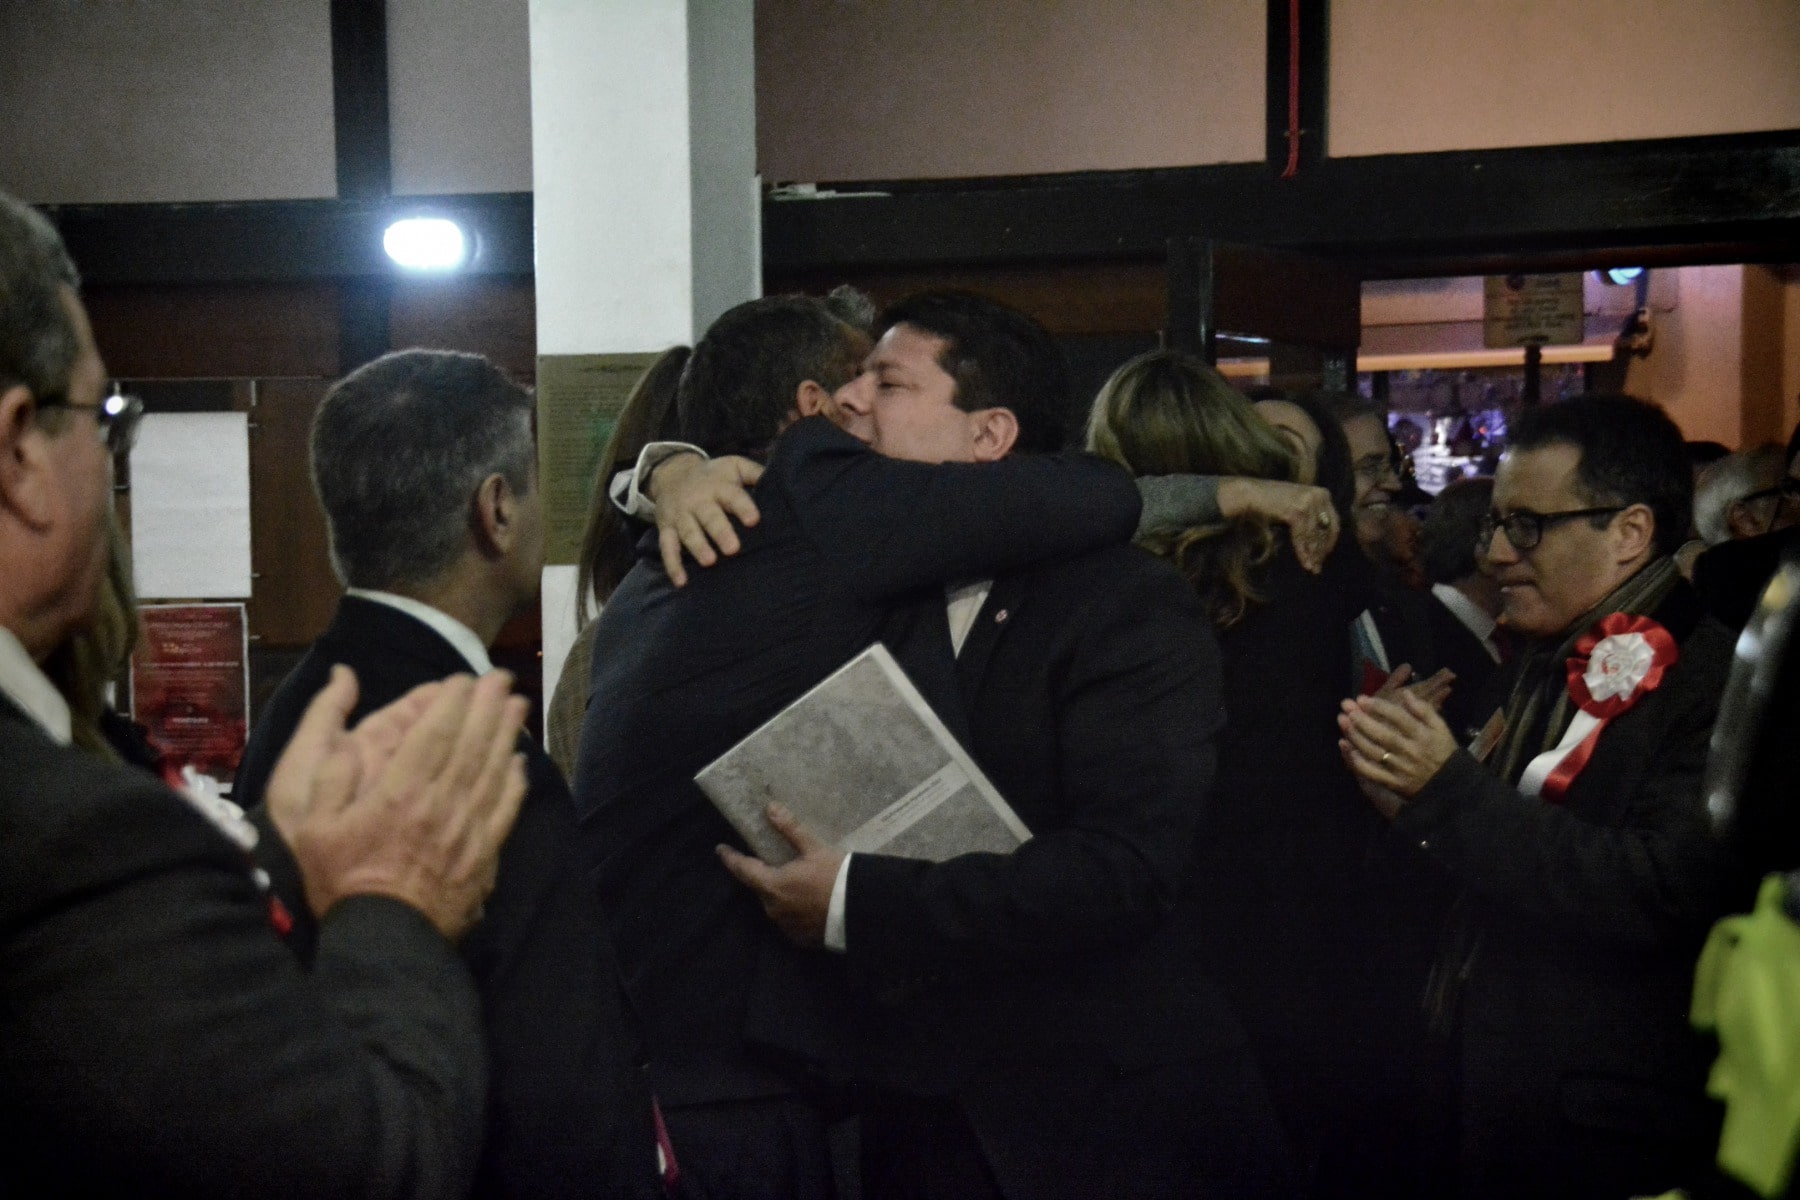 Gibraltar - 27th November 2015 - As Gibraltar woke up for work, John Macintosh Hall closed the count to the general election placing the GSLP/Liberal Alliance as the party to form Government.With an overall mayority 68.03% against the GSD's 31.37, the GSLP/Liberals recorded an overwhelming victory which once again sees Fabian Picardo as the Chief Minister of Gibraltar.The results were: -PICARDO, Fabian Raymond 10852 GARCIA, Joseph John 10661 CORTES, John Emmanuel 10529 LICUDI, Gilbert Horace 10379 ISOLA , Albert Joseph 10313 COSTA, Neil Francis 10048 SACRAMENTO, Samantha Jane 9822 LINARES, Steven Ernest 9690BALBAN, Paul John 9511 BOSSANO, Joseph John 9145FEETHAM, Daniel Anthony 5054 HASSAN NAHON, Marlene Dinah Esther 4892 PHILLIPS, Elliott John 4784 REYES, Edwin Joseph 4766 CLINTON, Roy Mark 4733 HAMMOND, Trevor Nicholas 4578LLAMAS, Lawrence Francis 4565 VASQUEZ, Robert Michael 4535 WHITE, Christopher George 4324 KARNANI-SANTOS, Kim Sylvia 4314